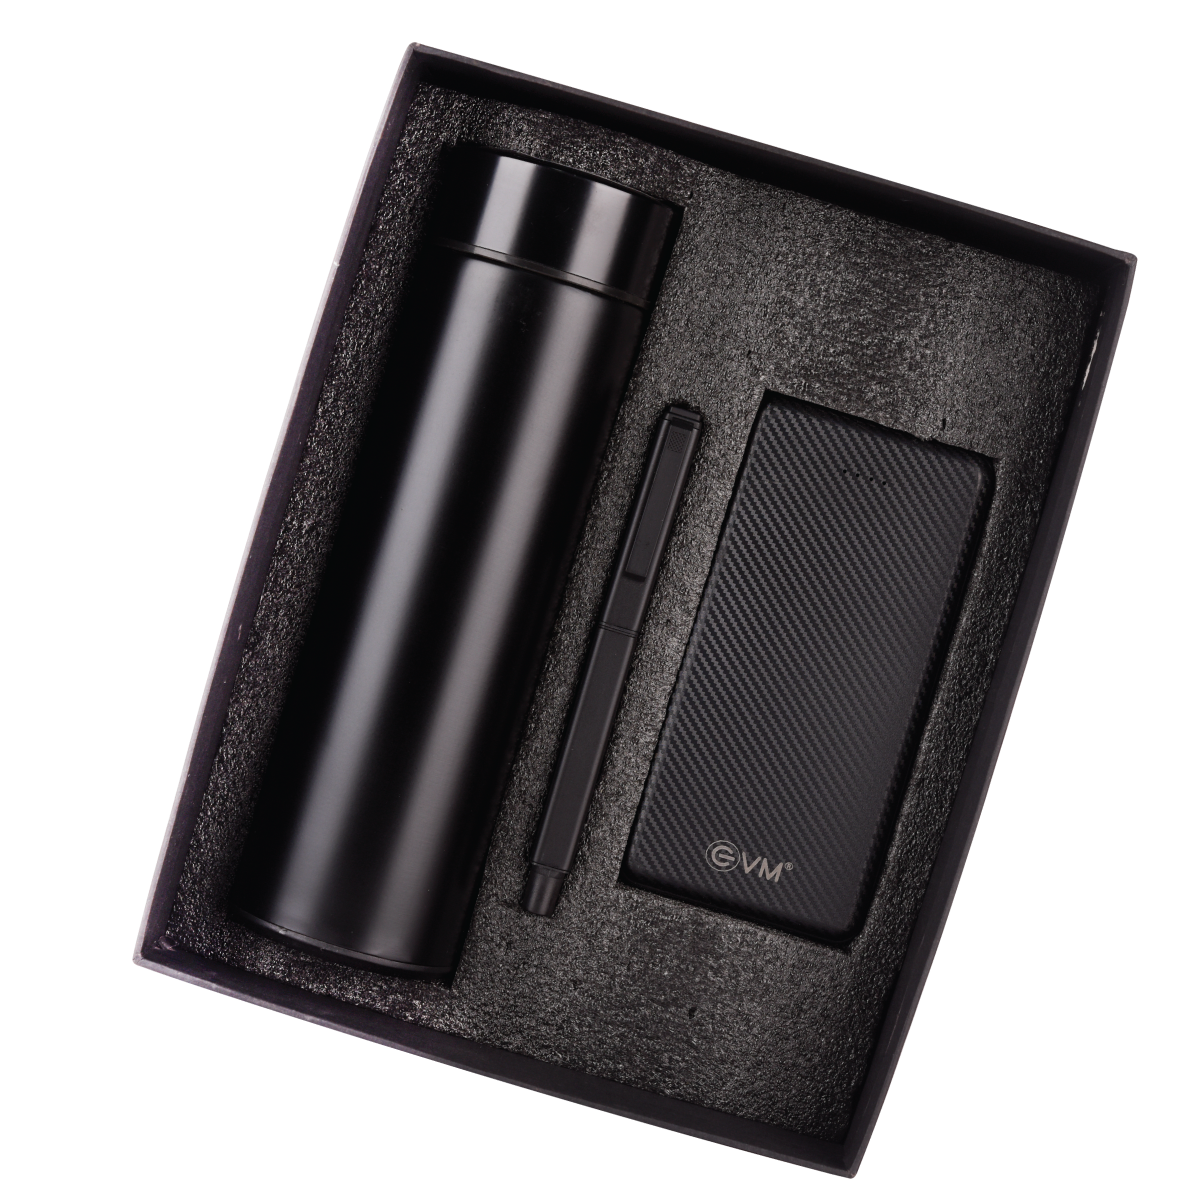 Black 3in1 Powerbank, Bottle, and Pen Combo Gift Set - For Employee Joining Kit, Corporate, Client or Dealer Gifting HK37461